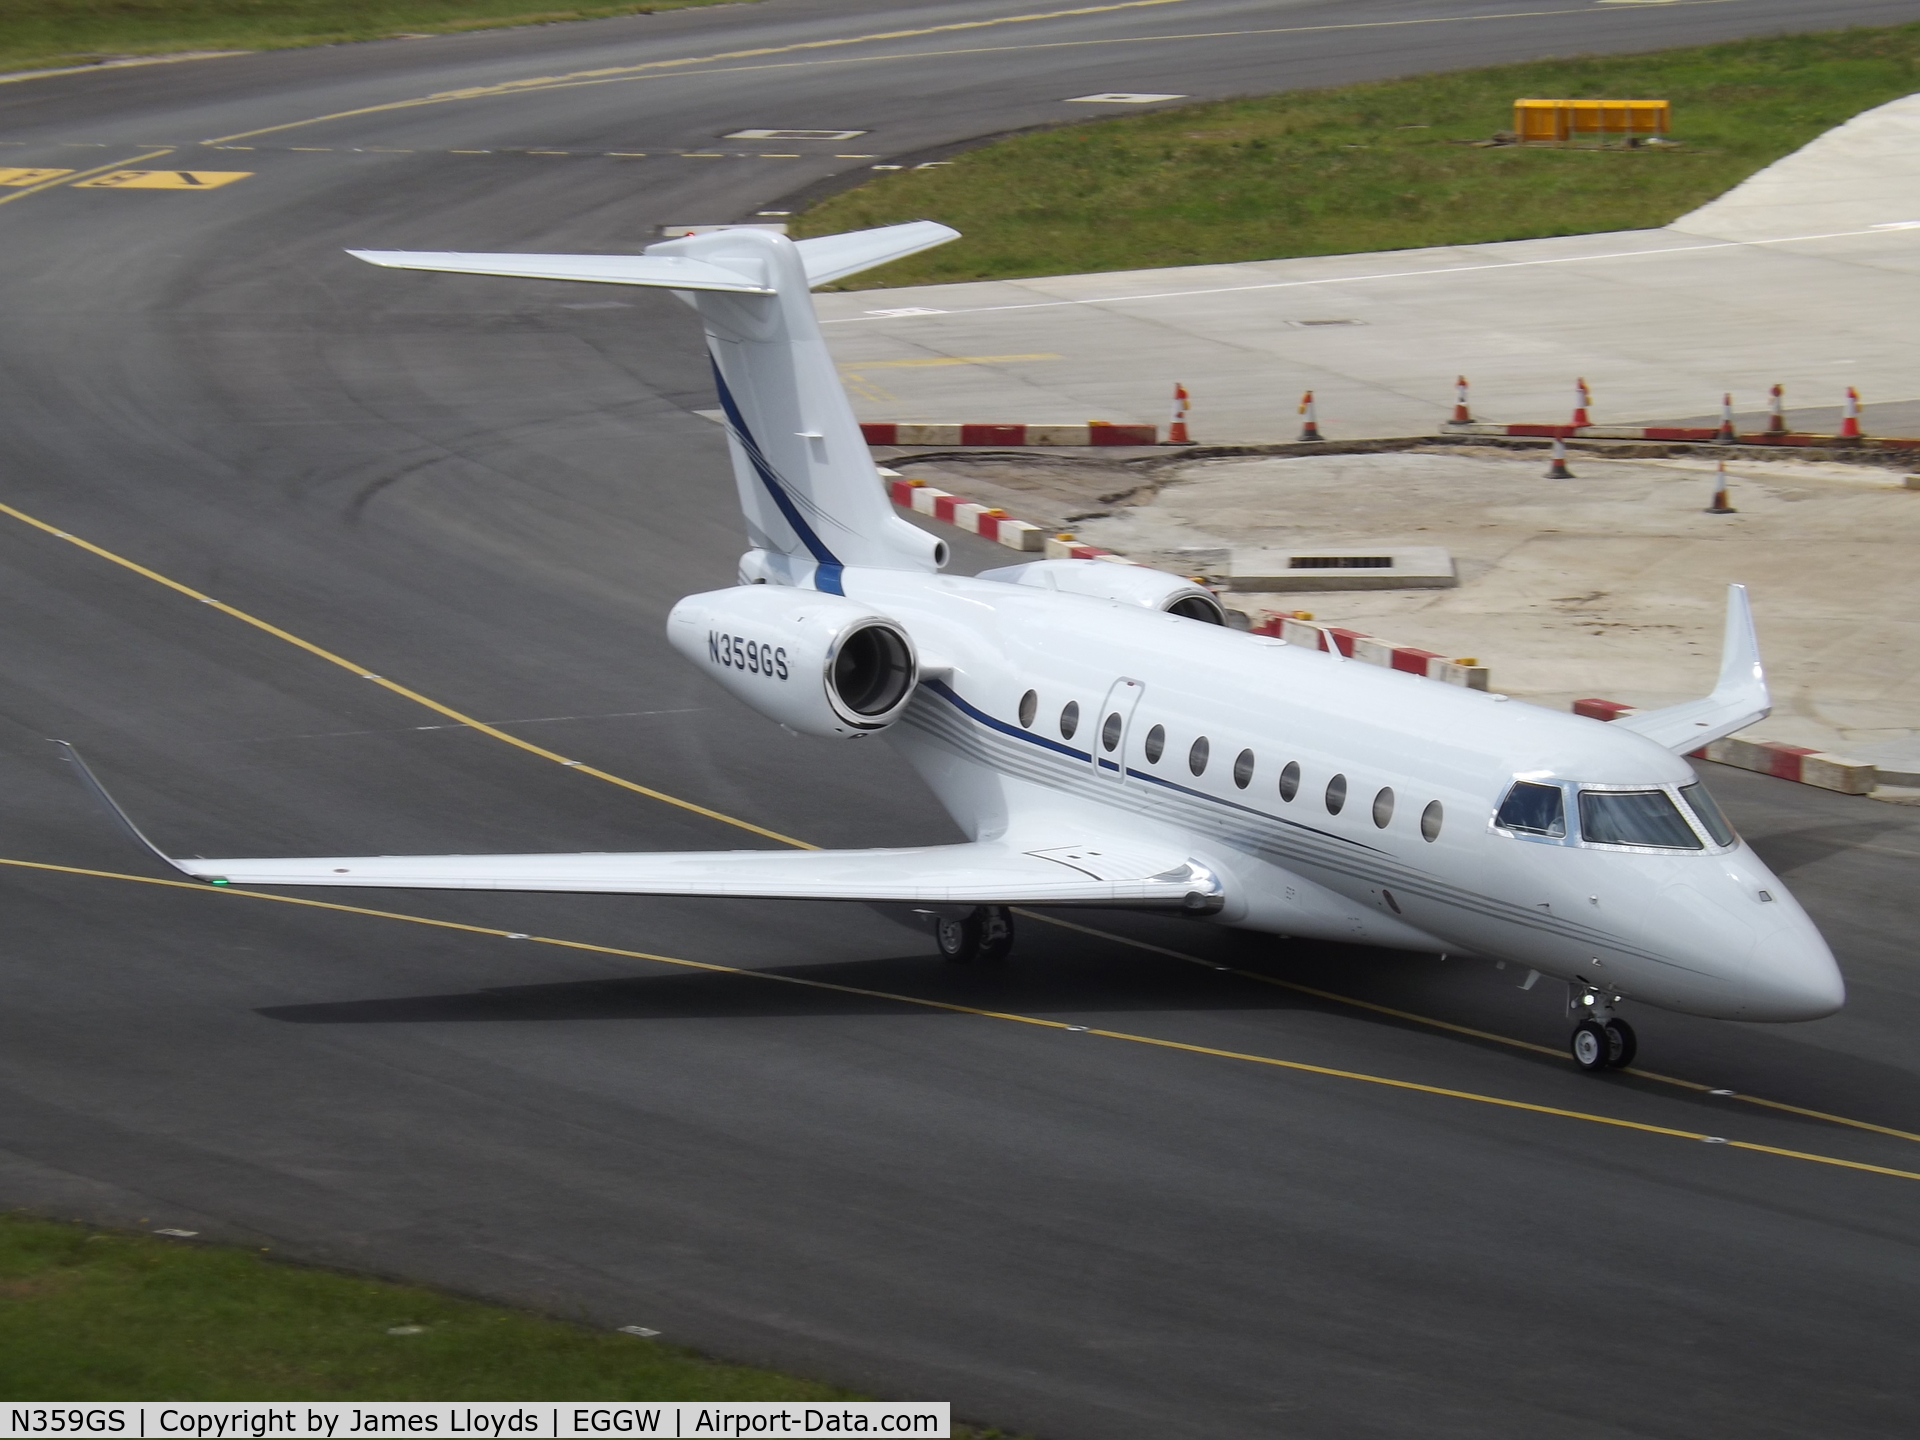 N359GS, 2017 Israel Aircraft Industries Gulfstream 280 C/N 2135, Taxing to Luton Airport.